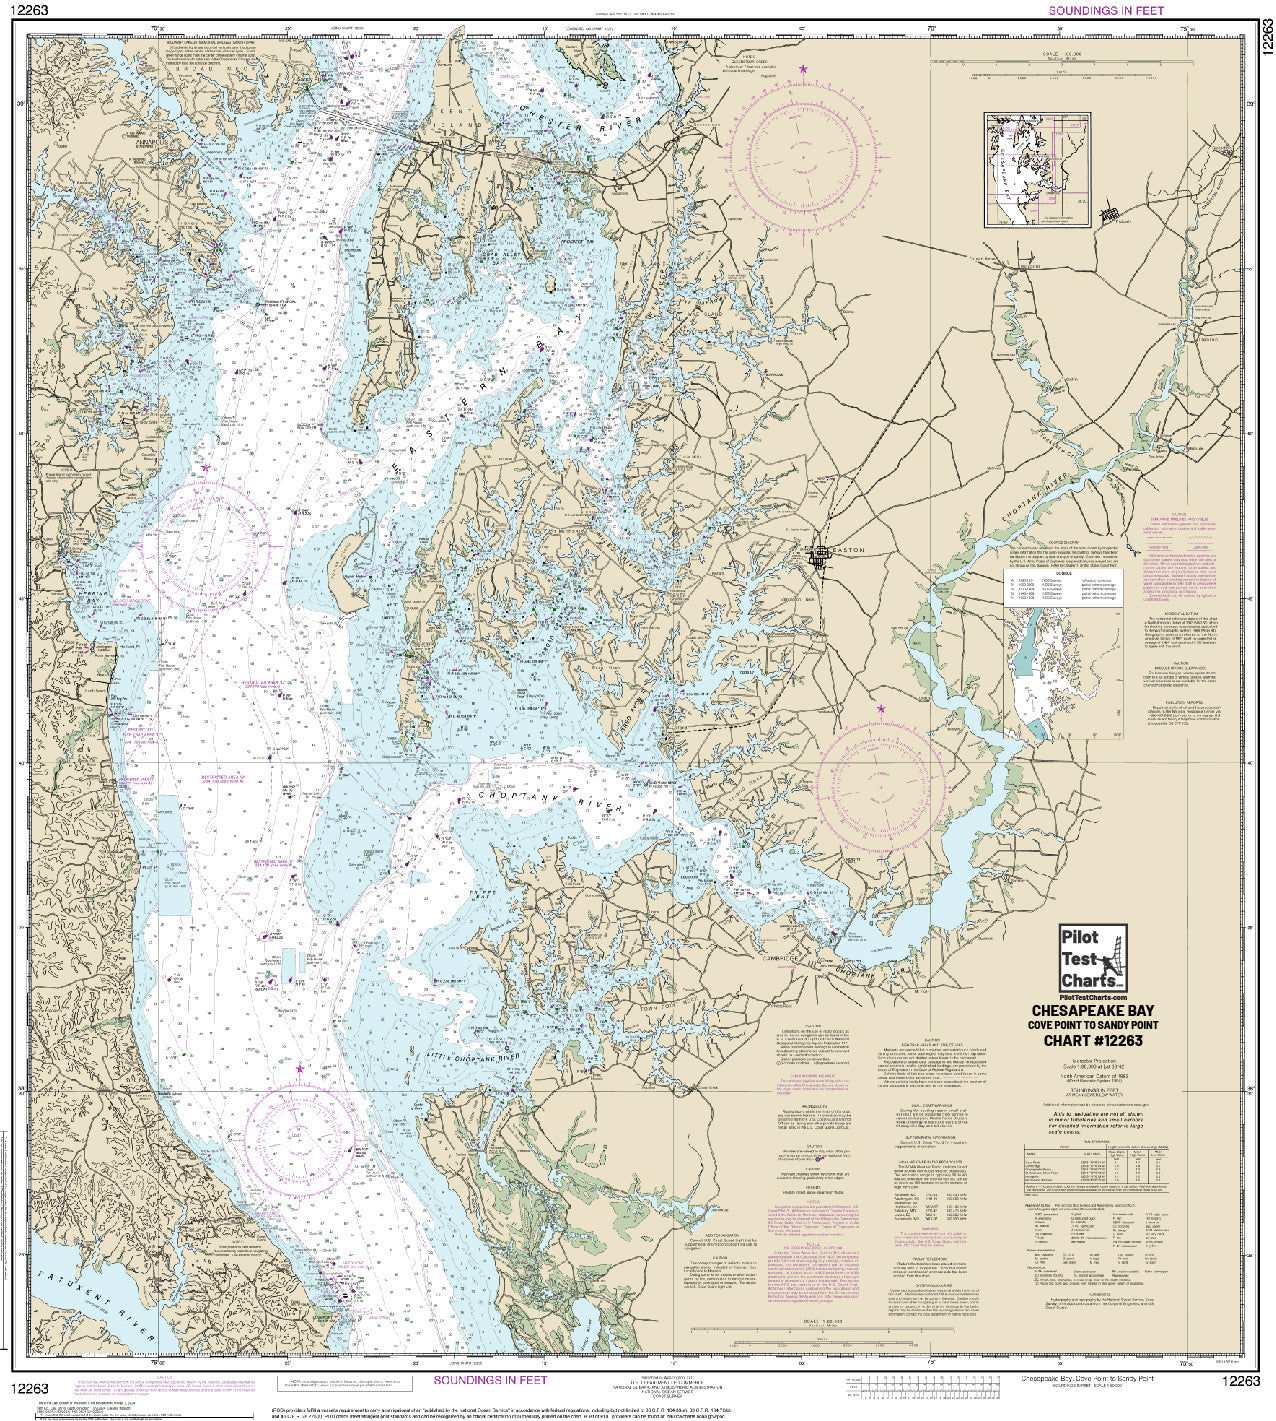 #12263 Chesapeake Bay, Cove Point to Sandy Point Chart